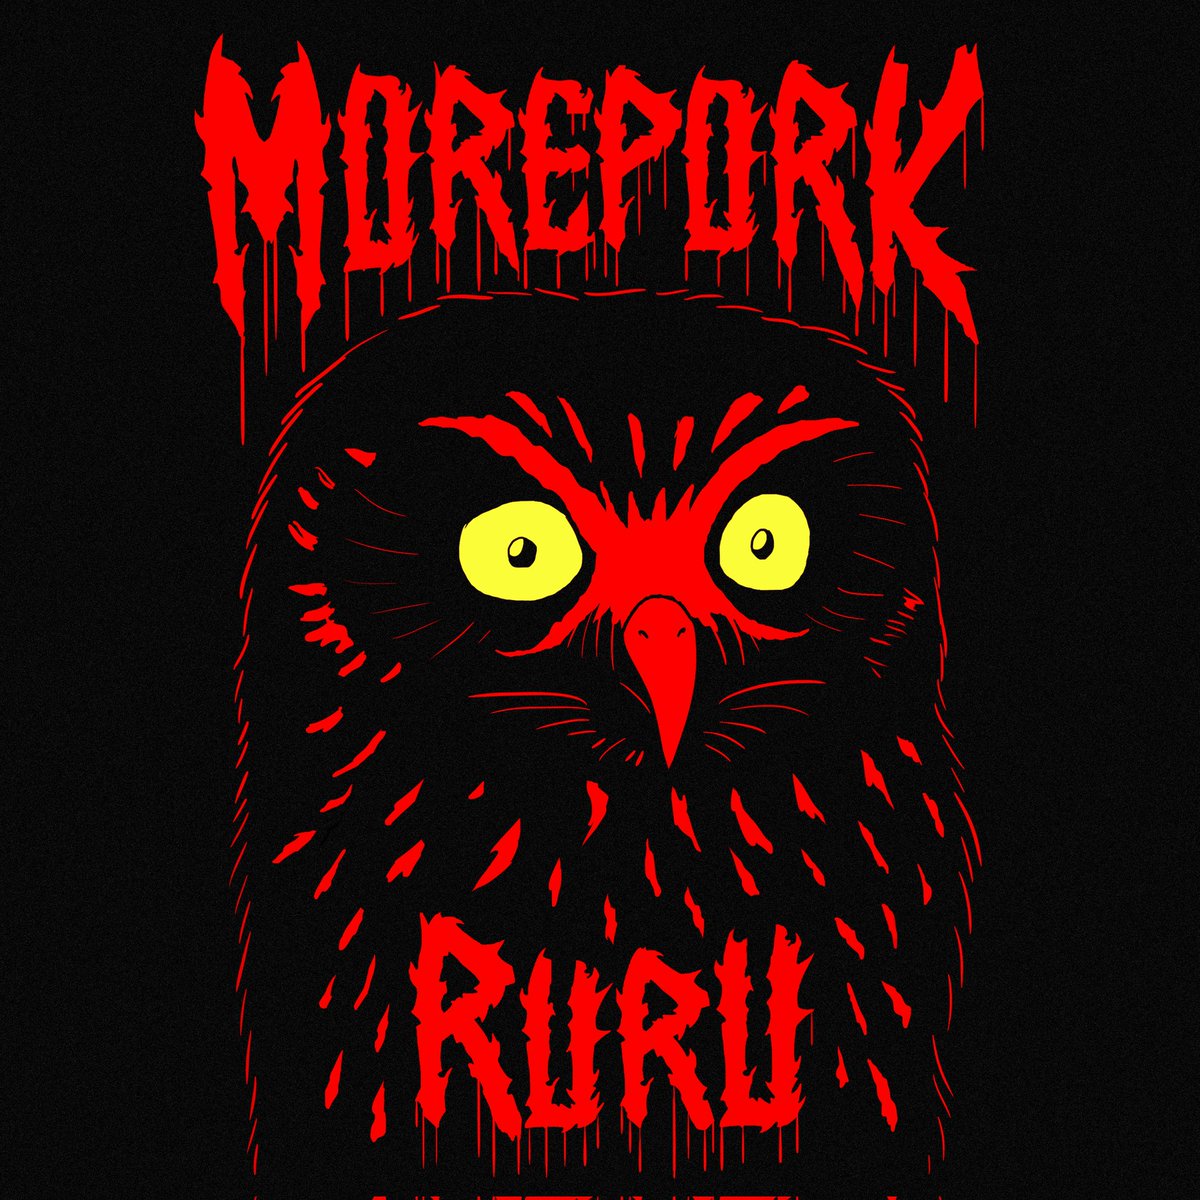 I am throwing my support behind the Ruru AKA Morepork for #birdofthecentury I love their Kubrick stare and the name that is just what it sounds like they are saying. Perfection 👌 

Who has your vote in this very important election?

#ruru #morepork #iamthenight  #birdoftheyear